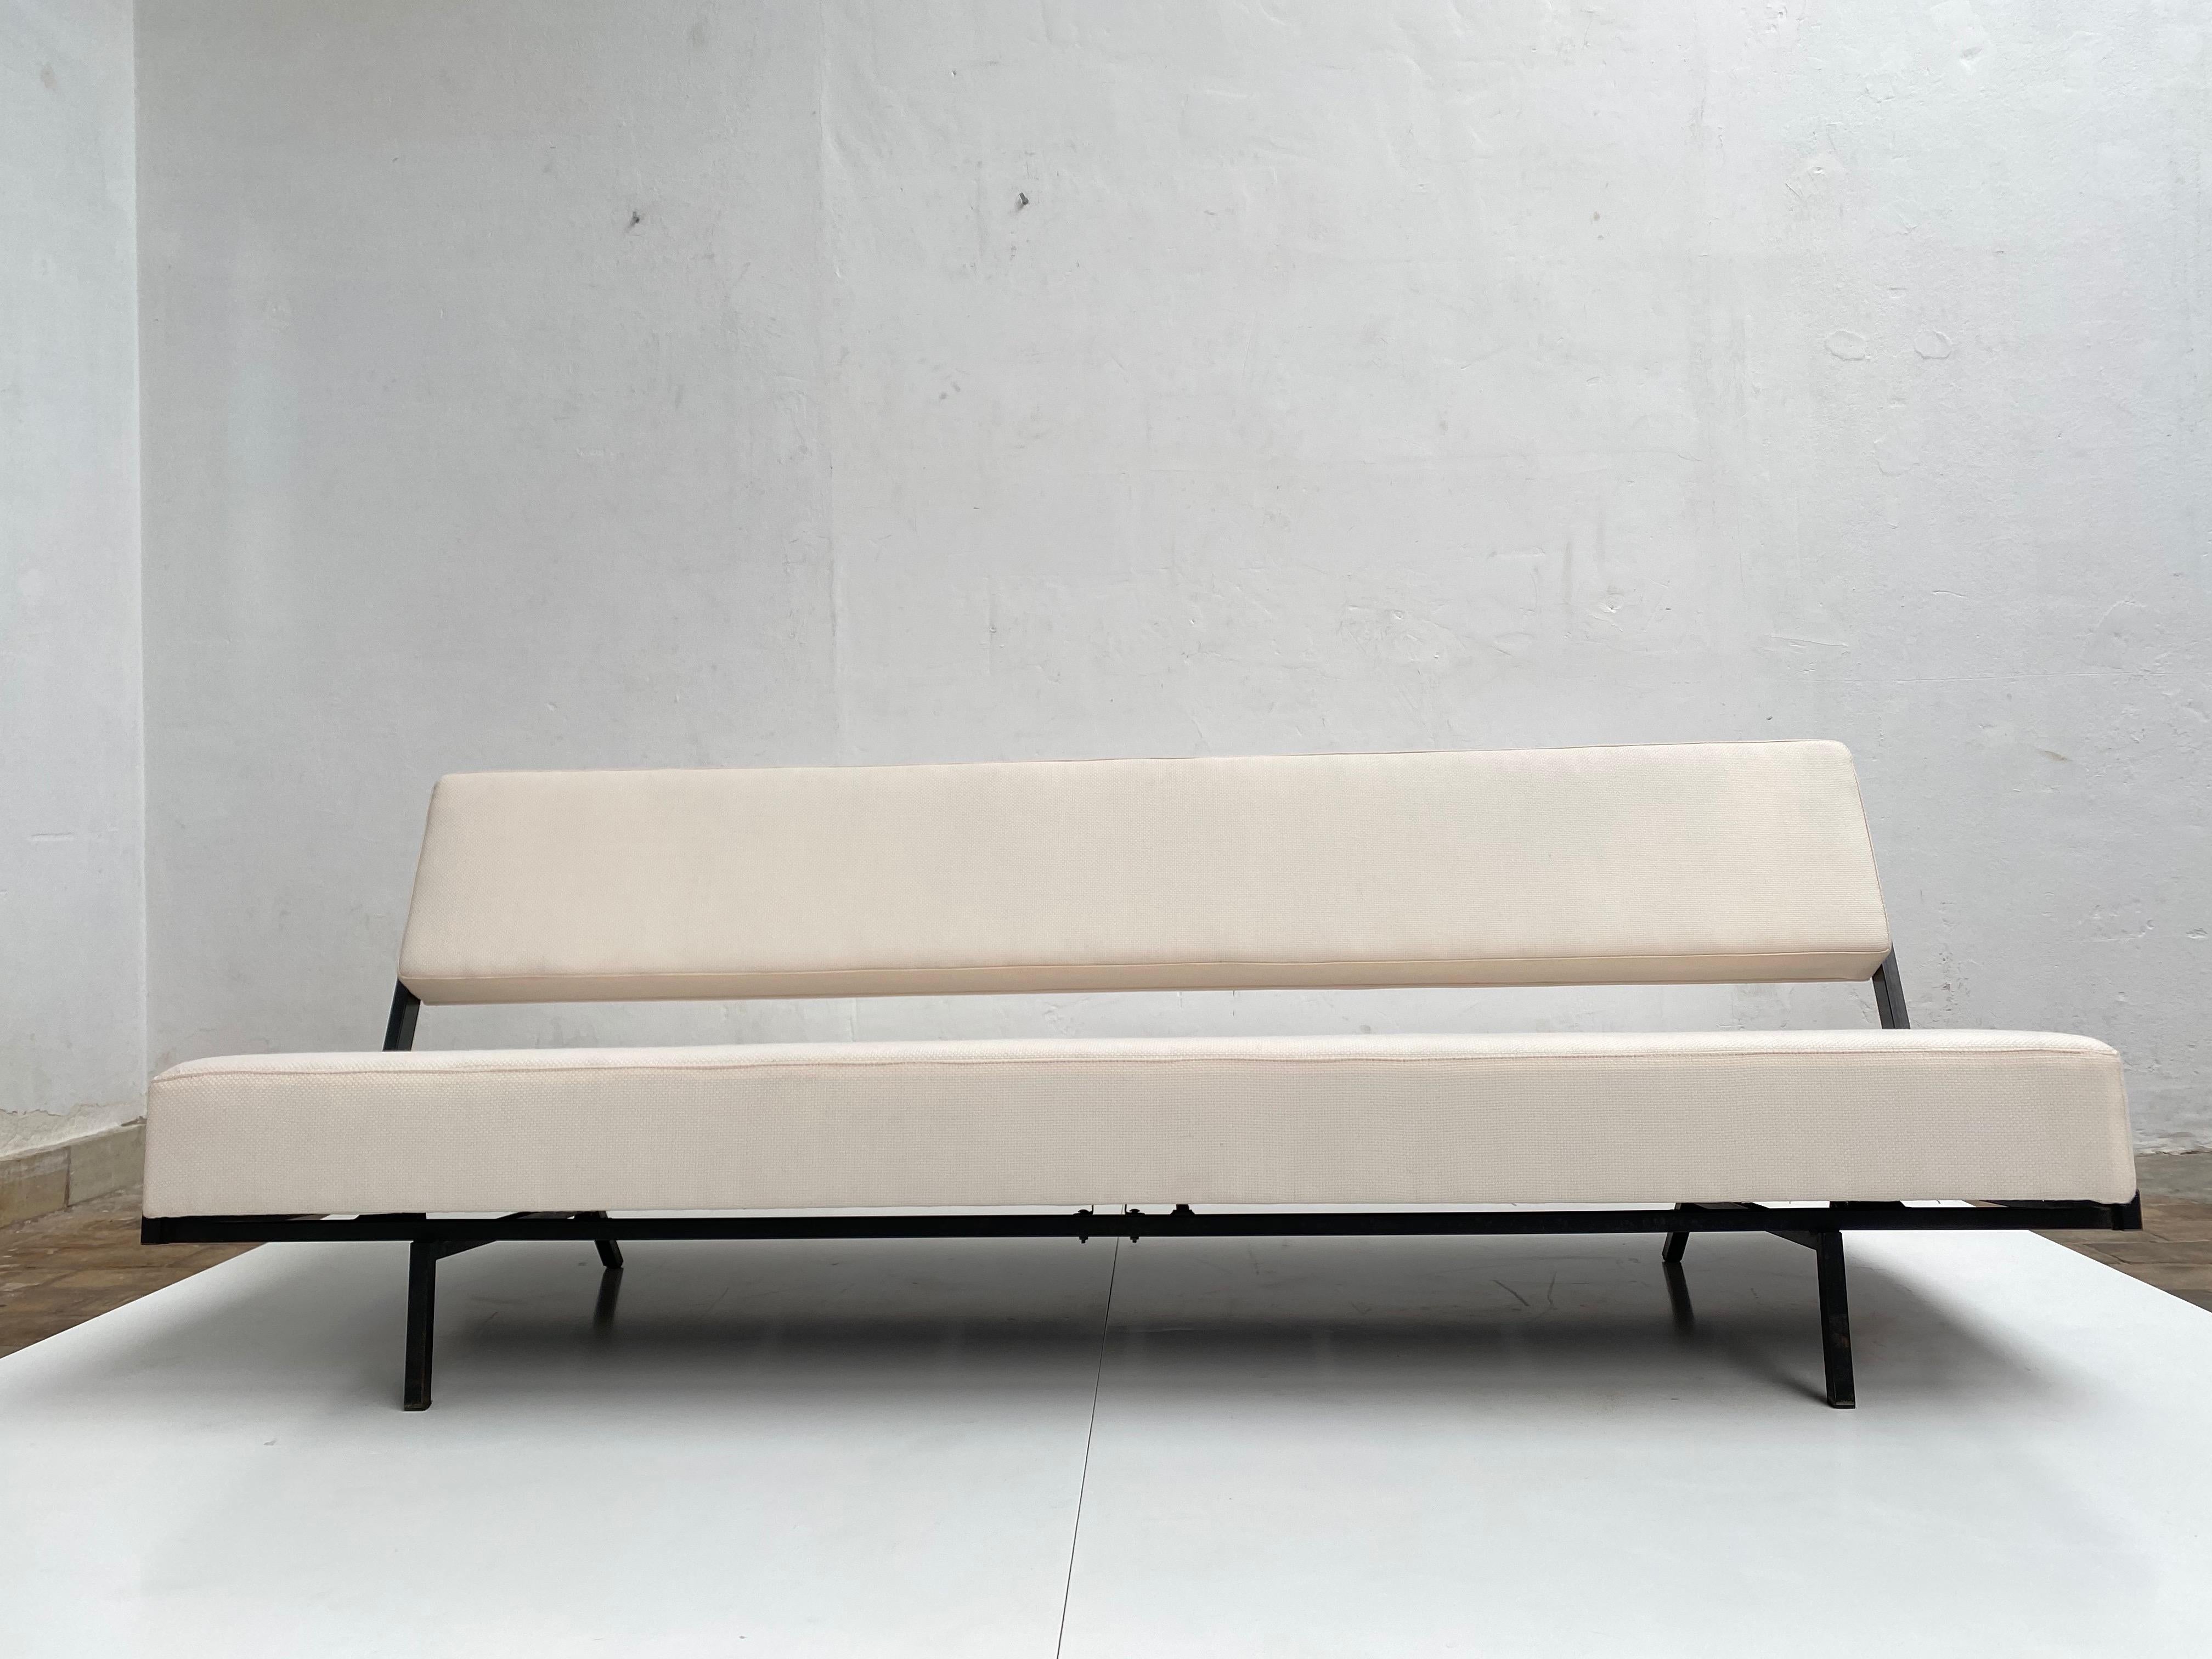 Space Saving Sleeping Sofa Minimal Design 1950s, Auping, the Netherlands In Good Condition For Sale In bergen op zoom, NL